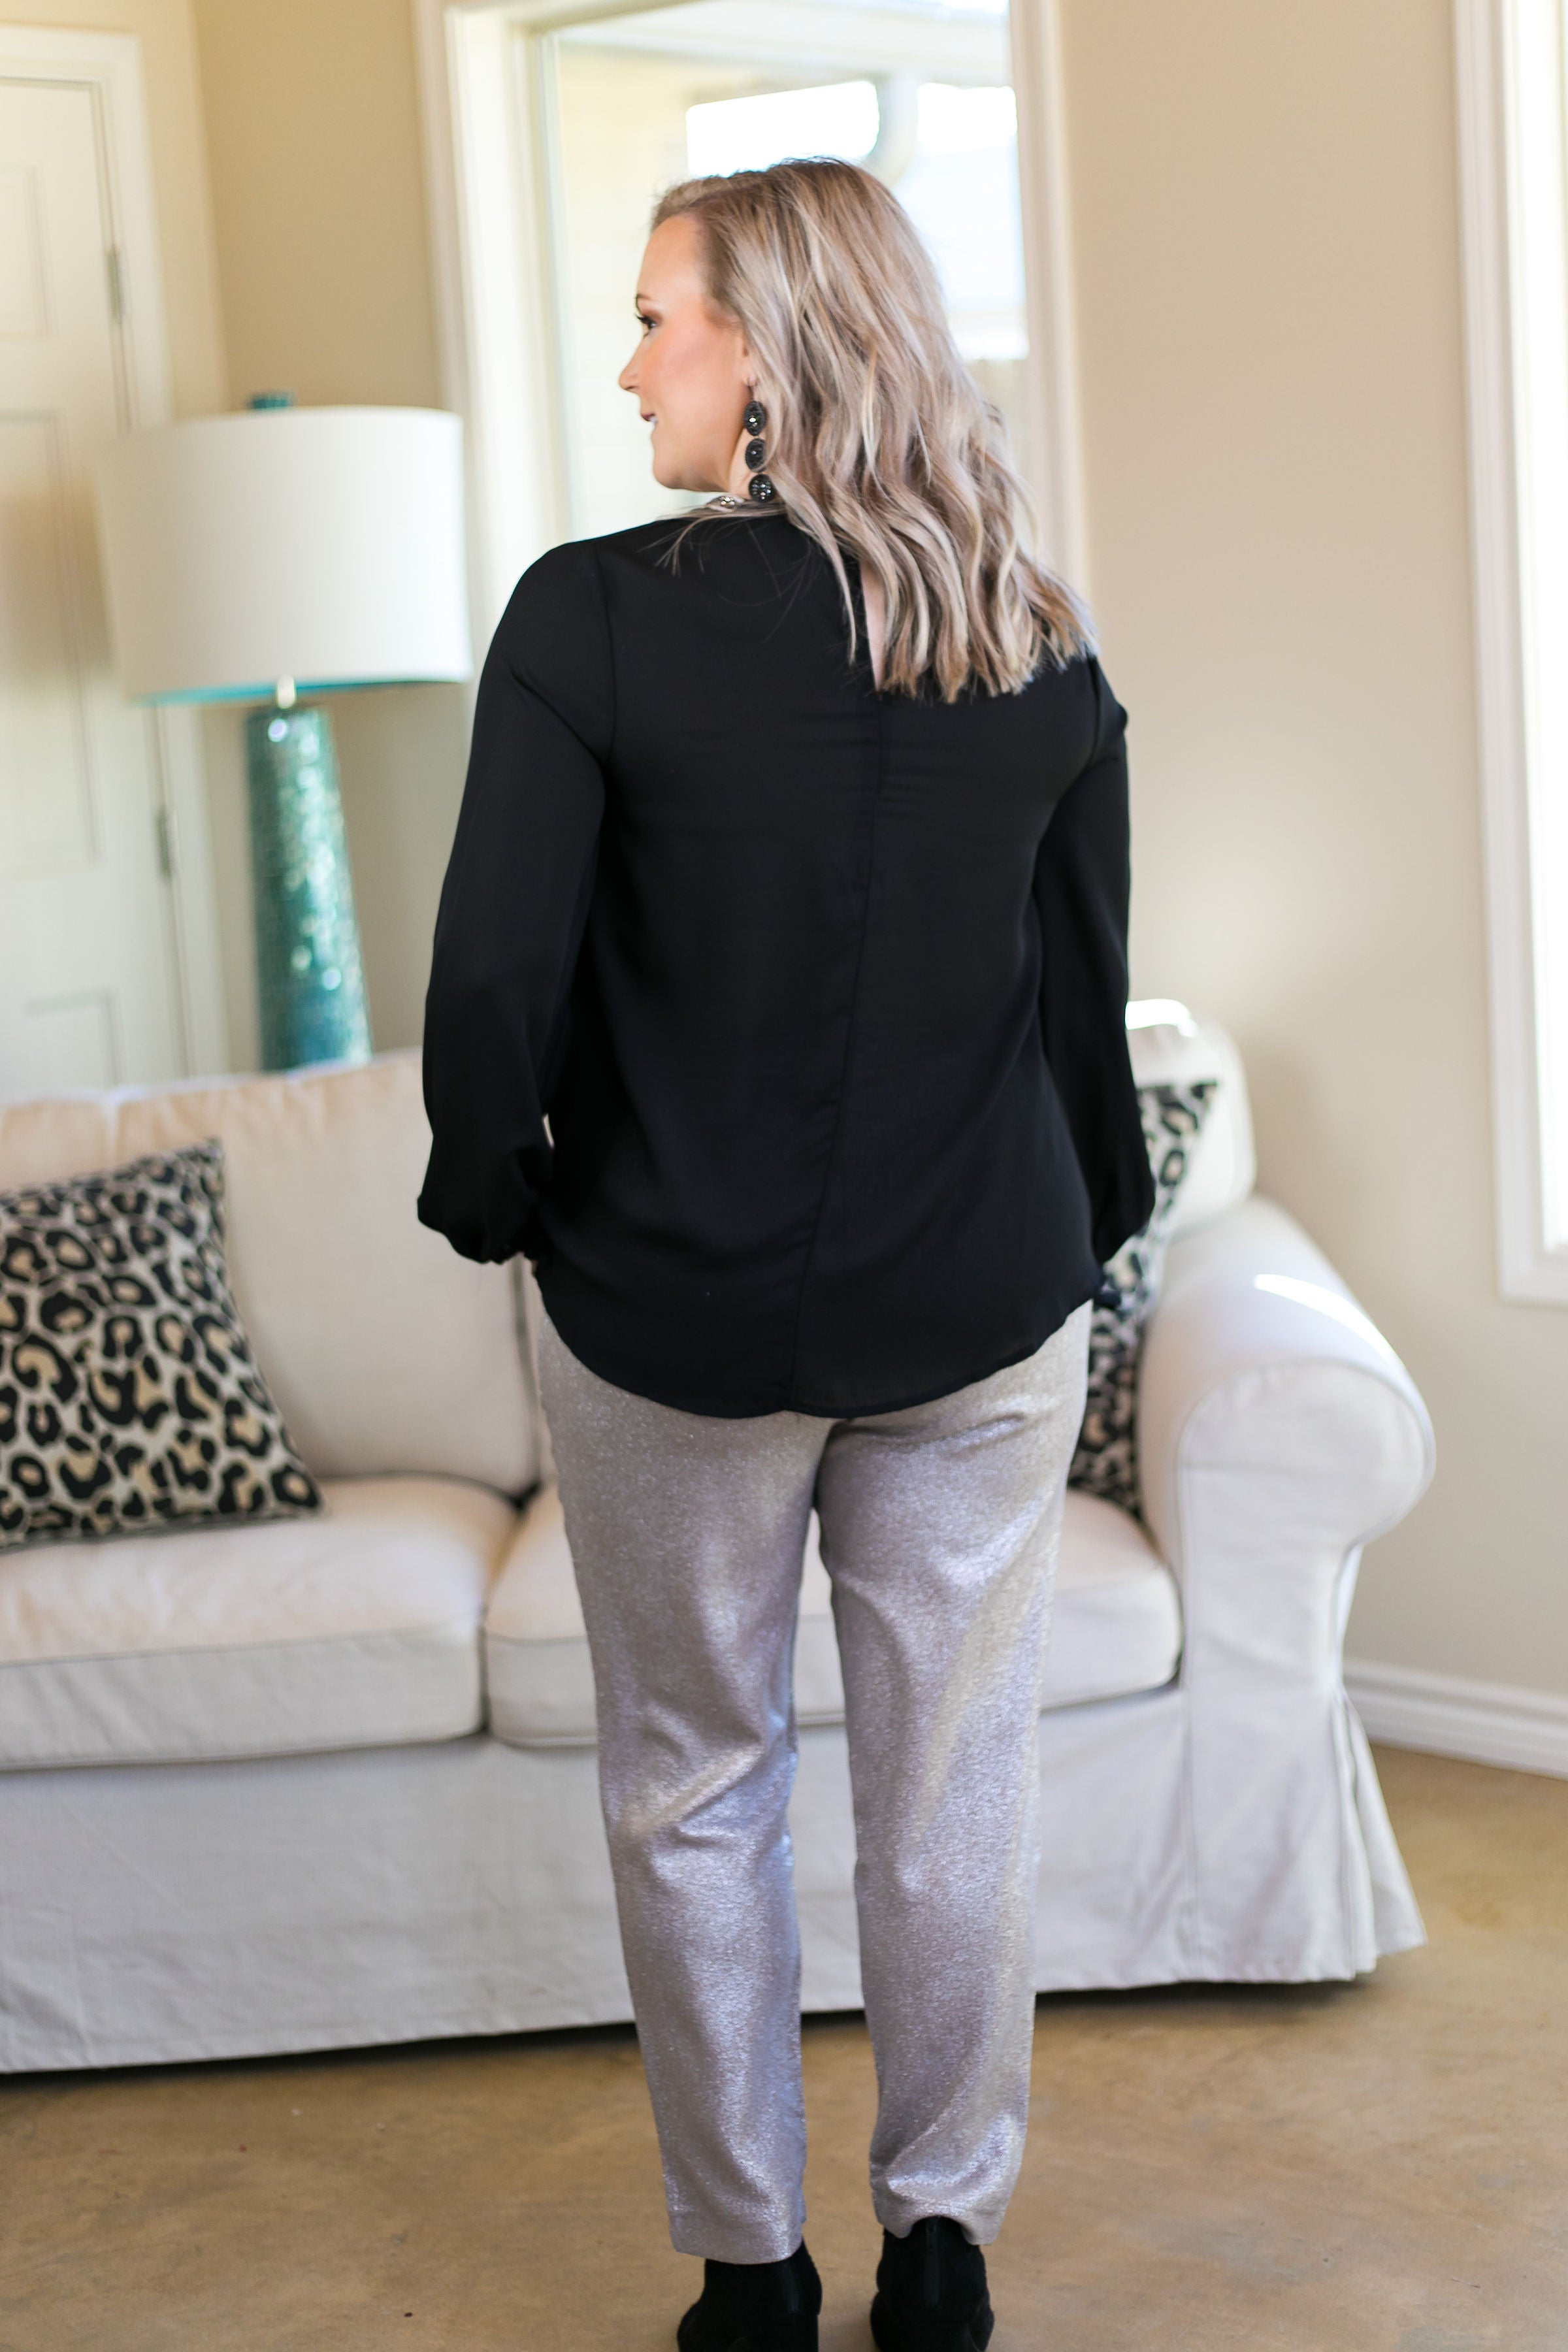 Heartbreak Girl Metallic Pleated Pants in Silver - Giddy Up Glamour Boutique